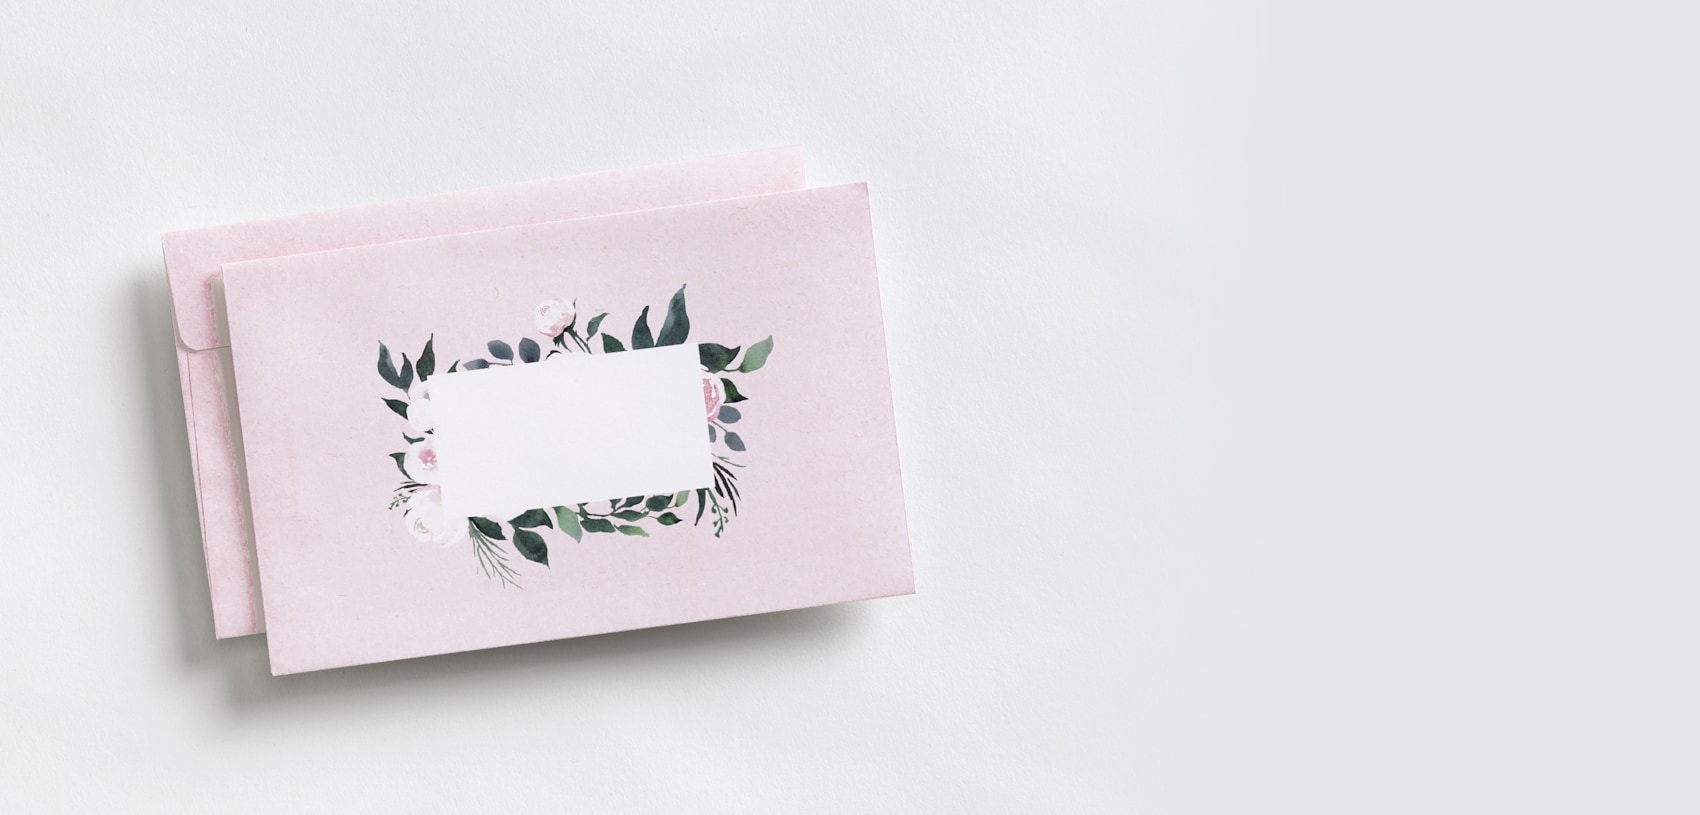 Larger version: personalized envelopes with flower pattern